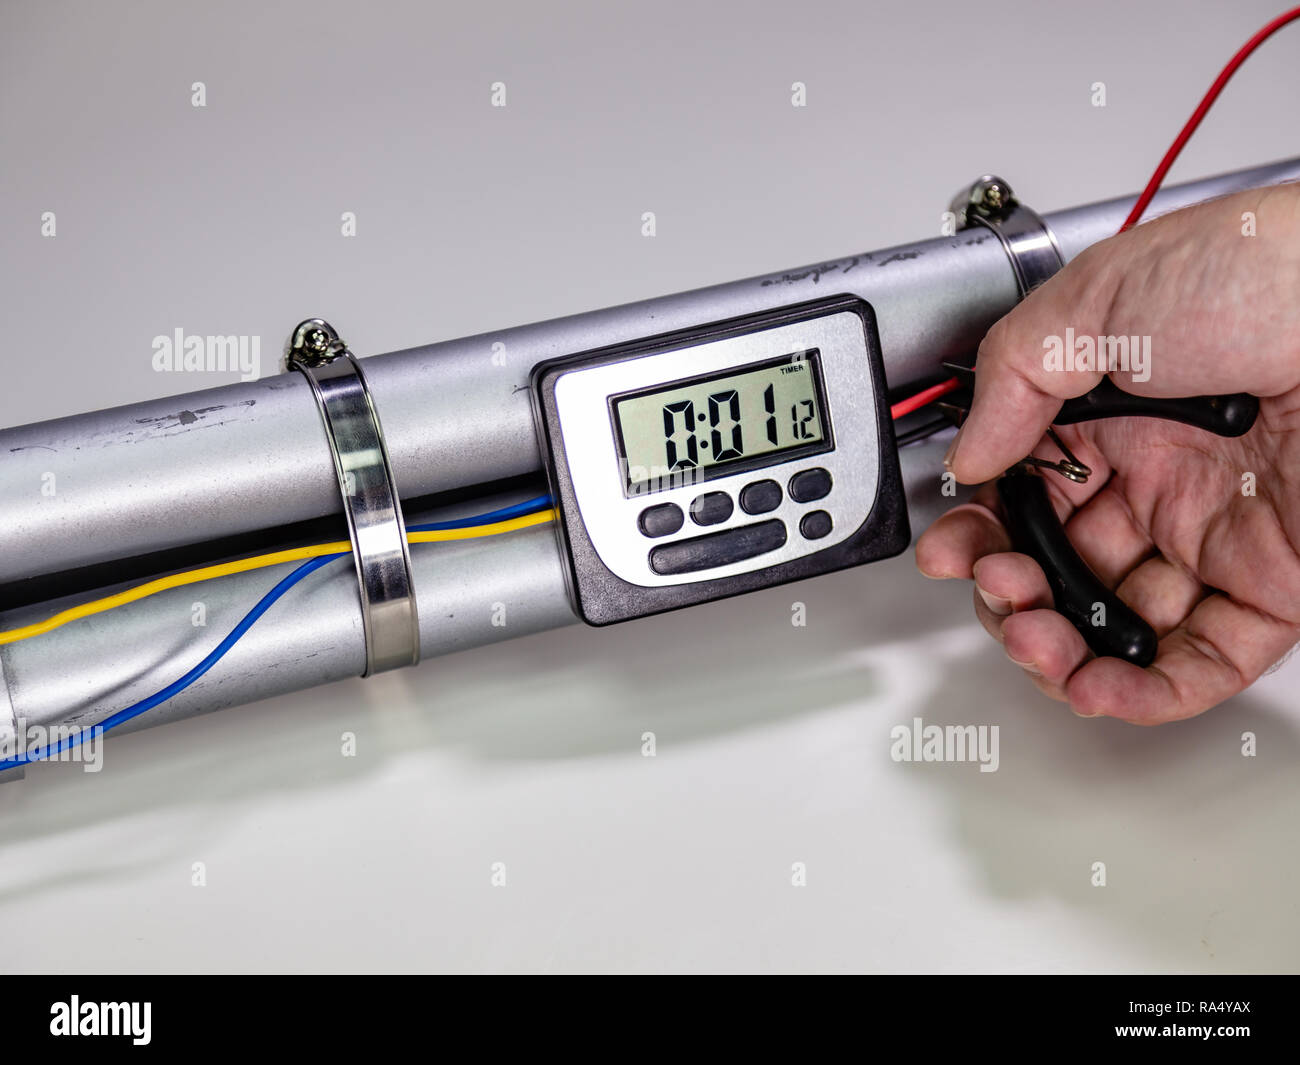 Hand cutting wire on pipe bomb with an lcd clock timer to trigger detonation on white background Stock Photo